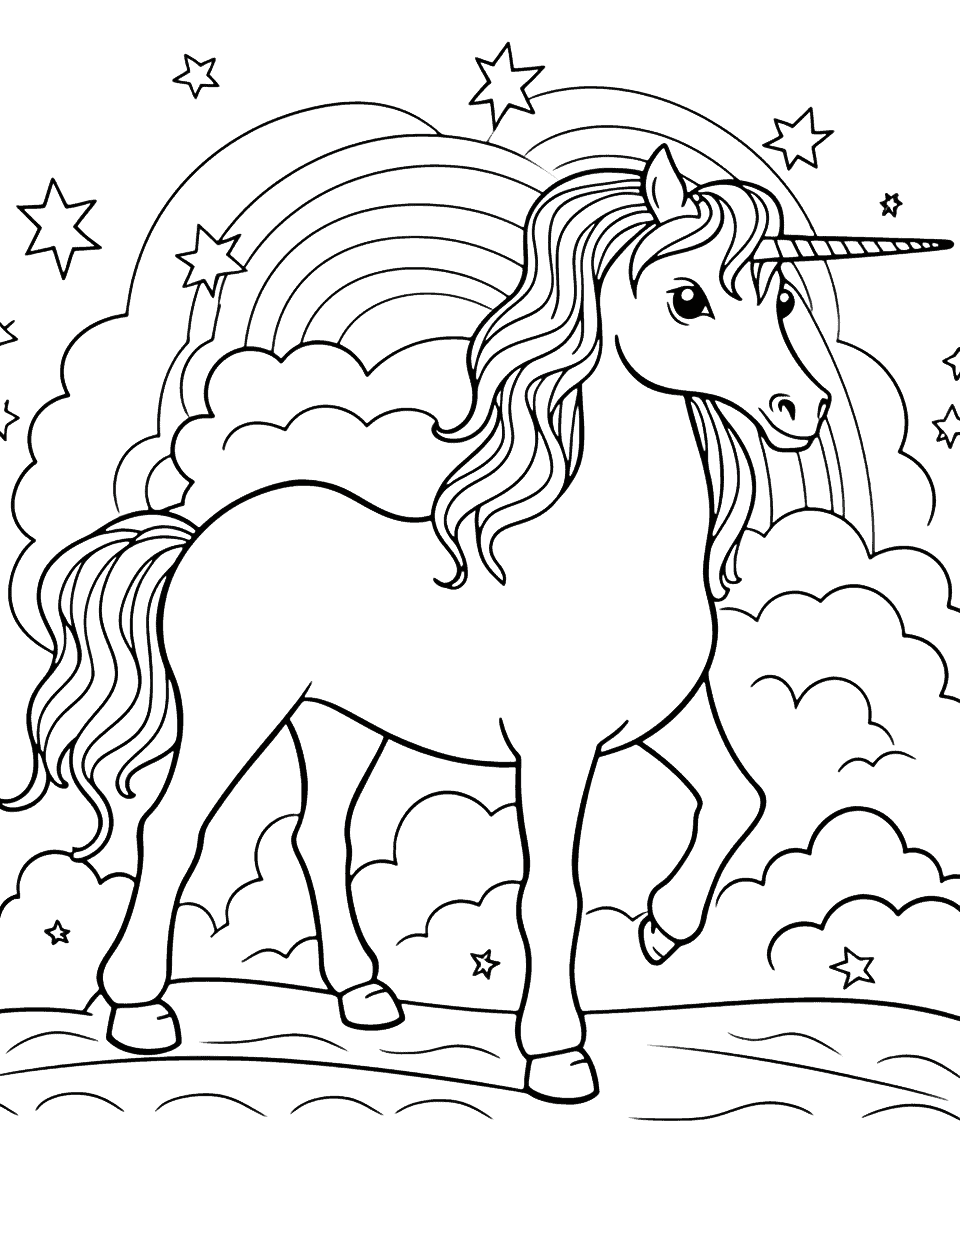 Unicorn Under a Rainbow Coloring Page - A magical unicorn standing under a rainbow in a mystical land.